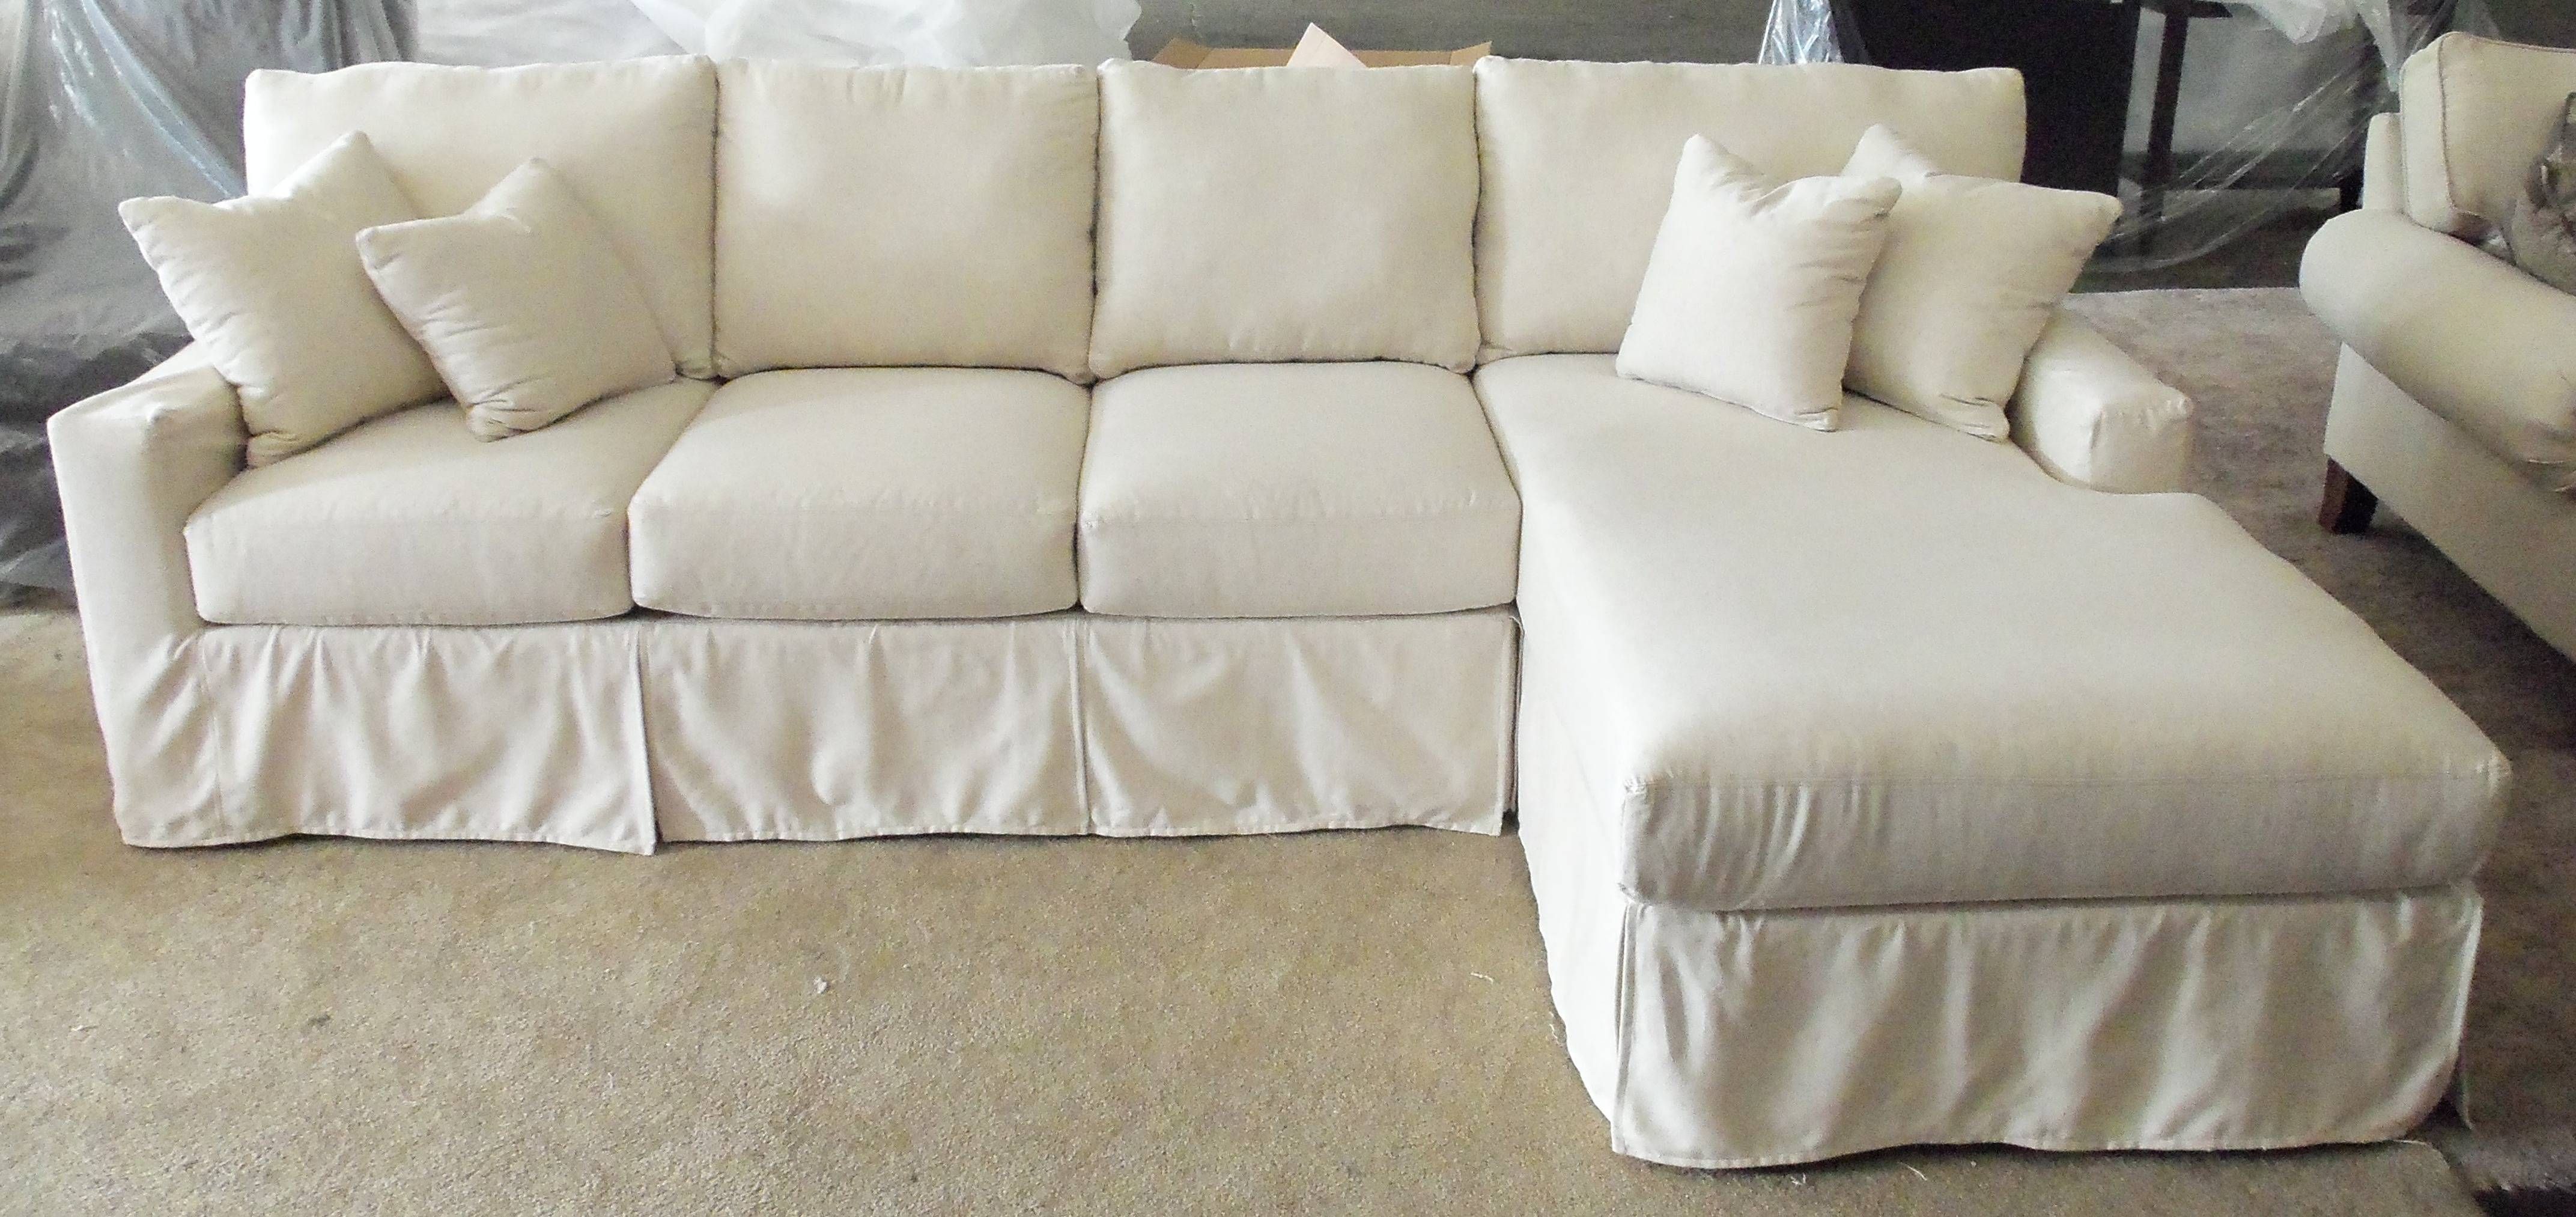 Sofa Bed With Chaise Cover | Centerfieldbar With Regard To Slipcovers For Sleeper Sofas (View 12 of 15)